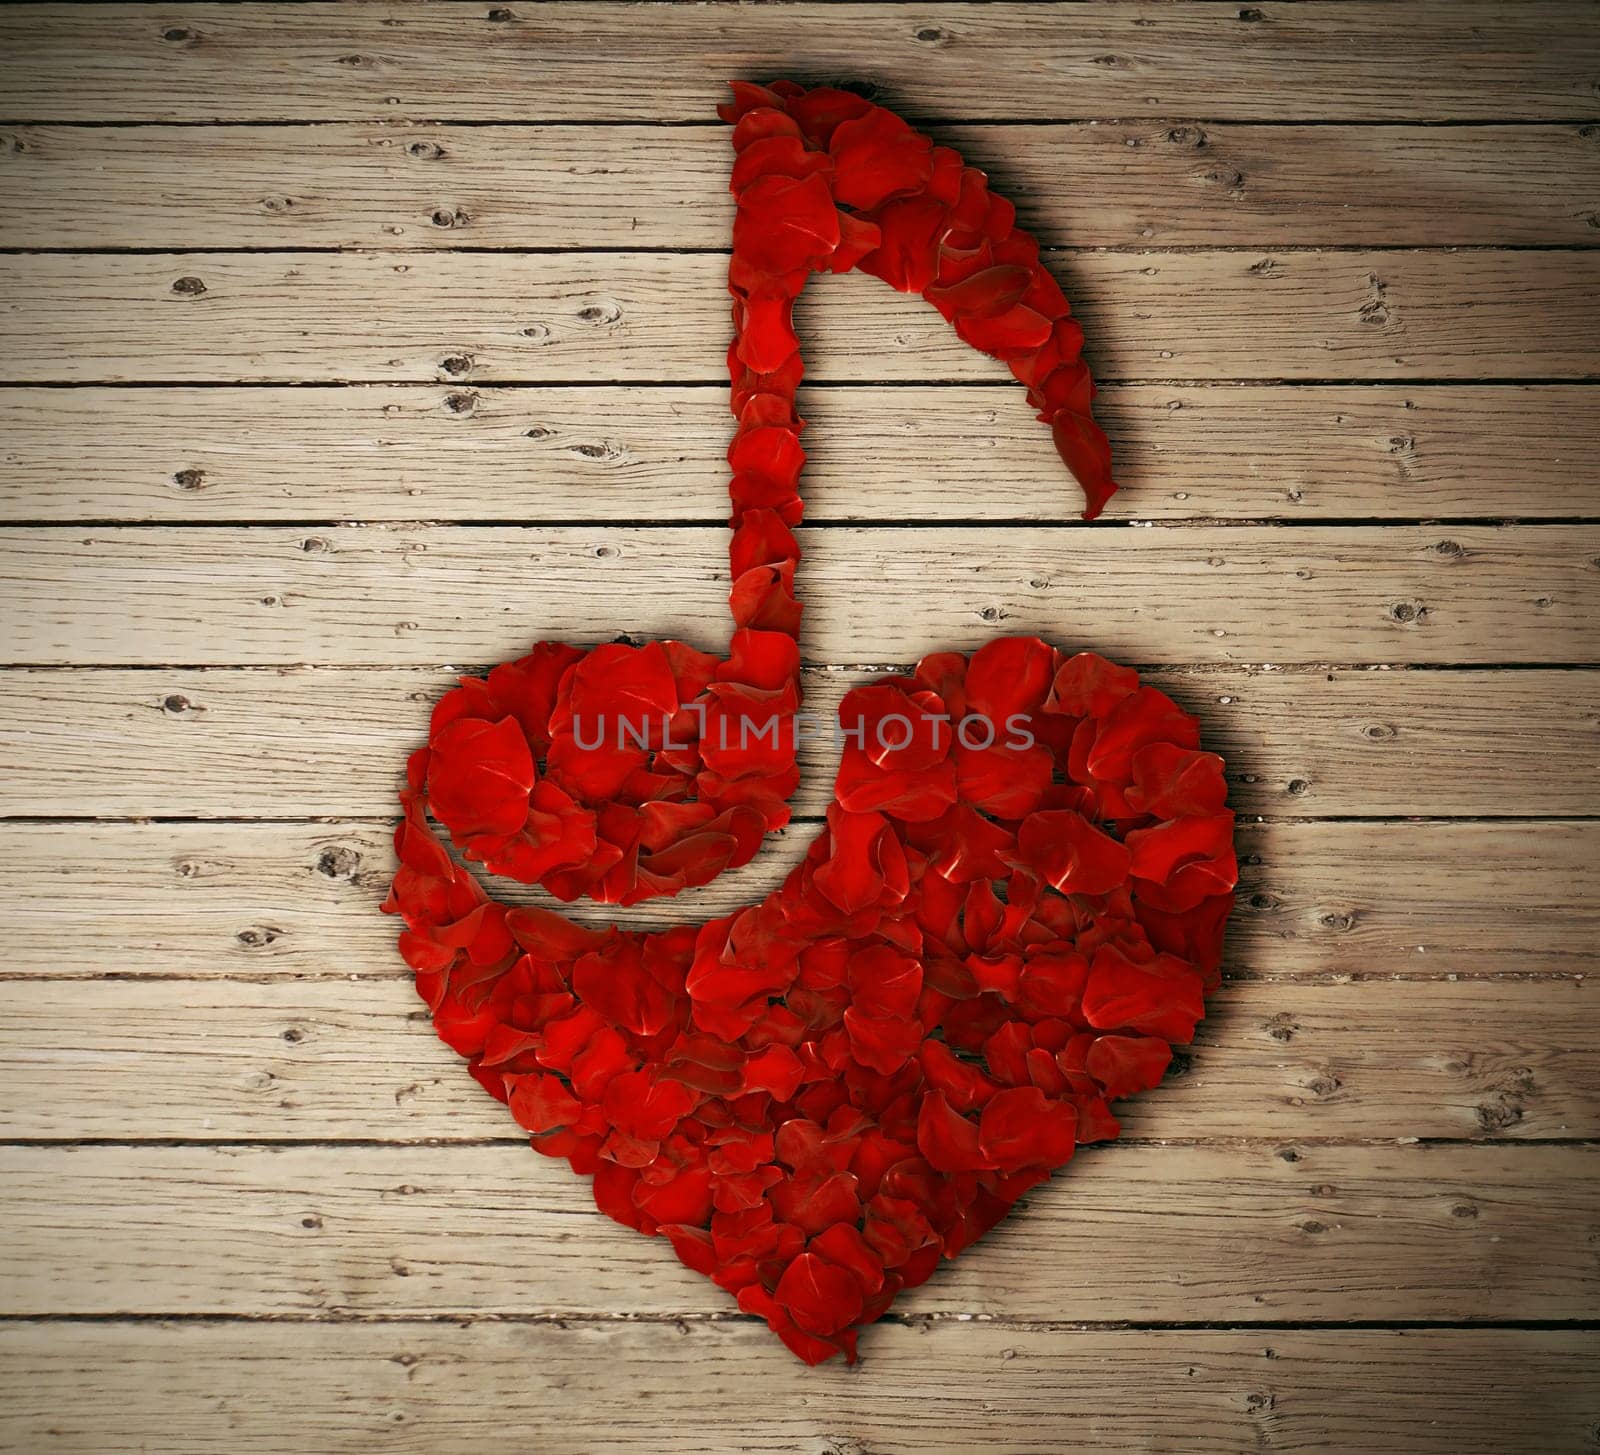 Red rose petals arranged in shape of heart with a music note inside isolated on wooden table. Love music concept